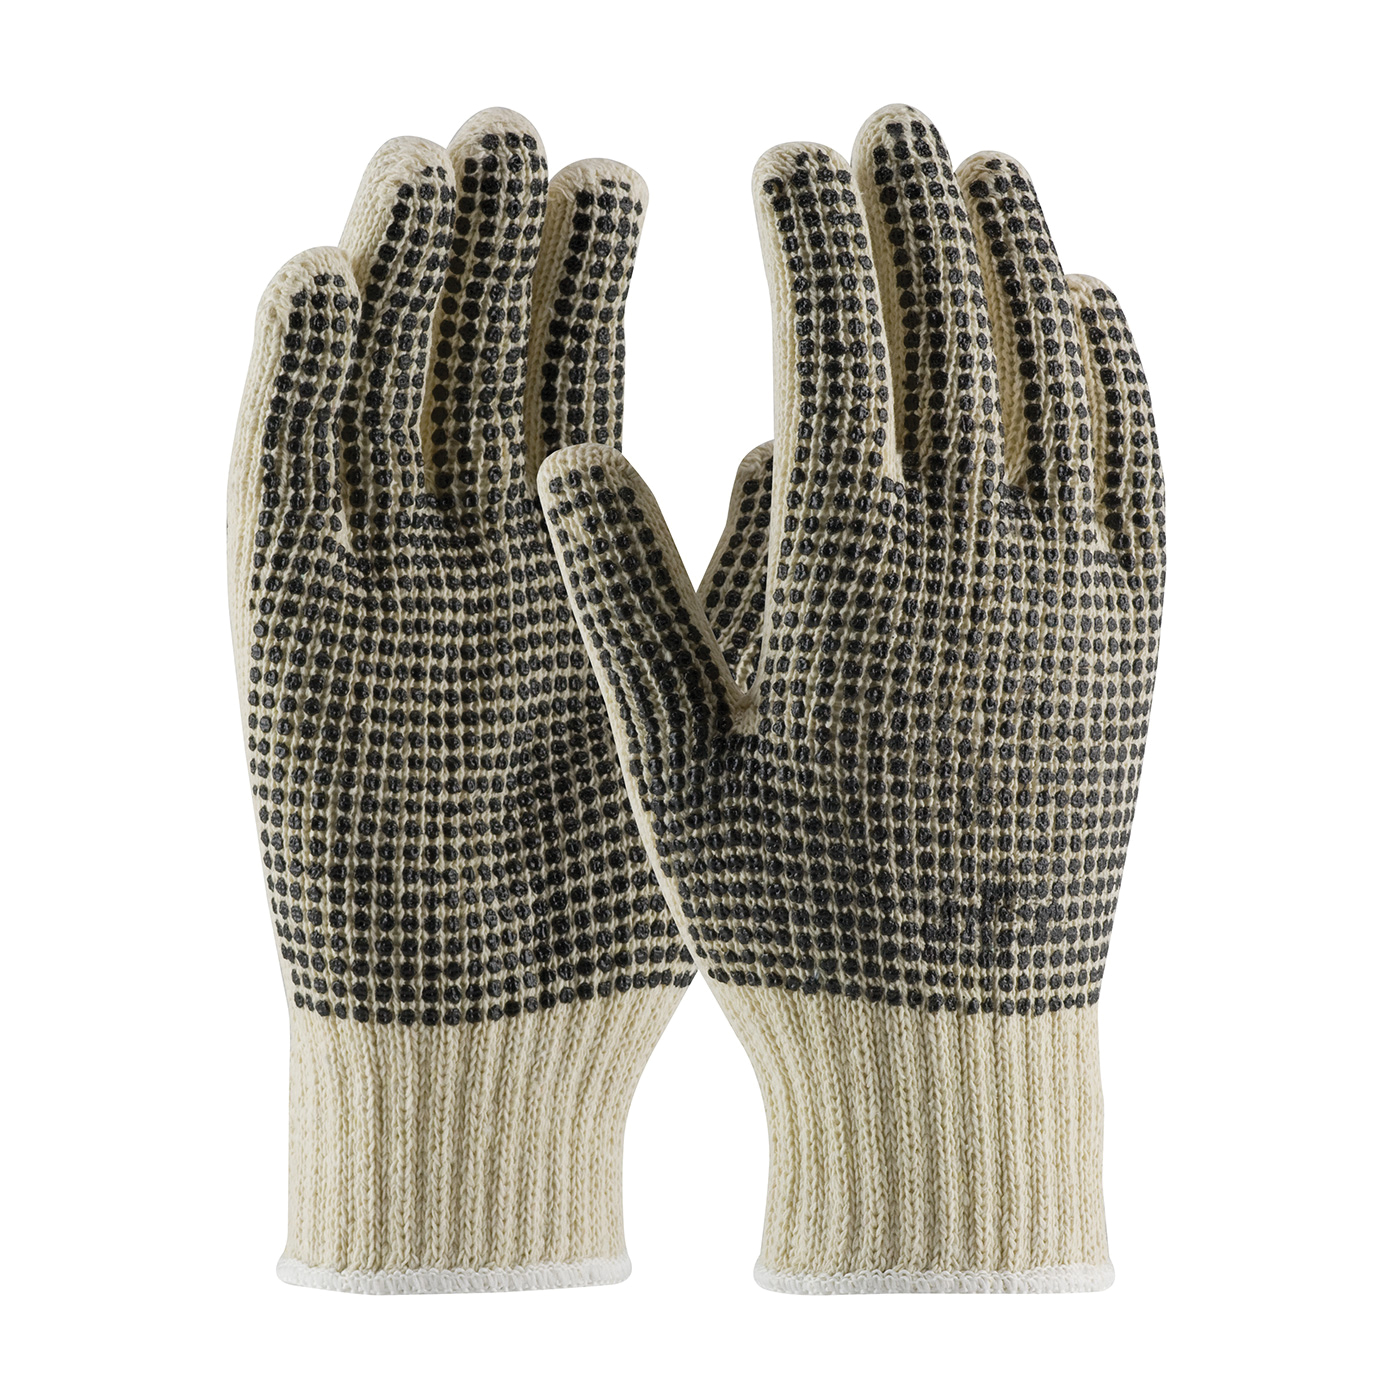 PIP® 37-C110PDD/XS Gloves, Coated, Seamless Knit Style, XS, PVC Palm, 7 ga Cotton/Polyester, Black/Natural, Continuous Knit Wrist Cuff, PVC Coating, Resists: Abrasion, Cotton/Polyester Lining